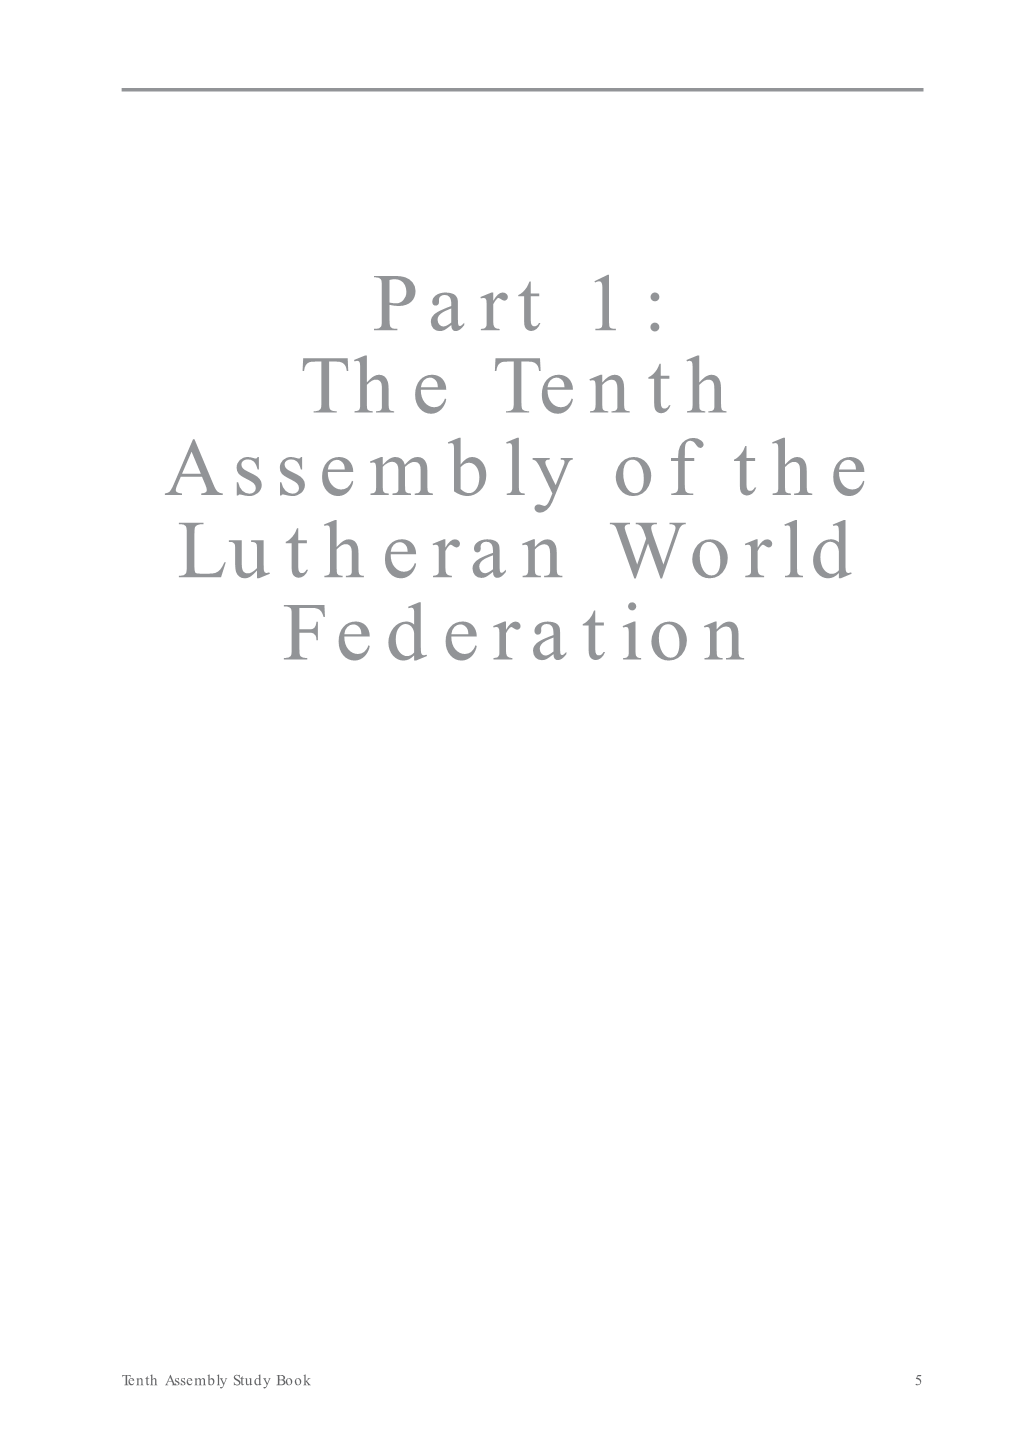 The LWF Tenth Assembly